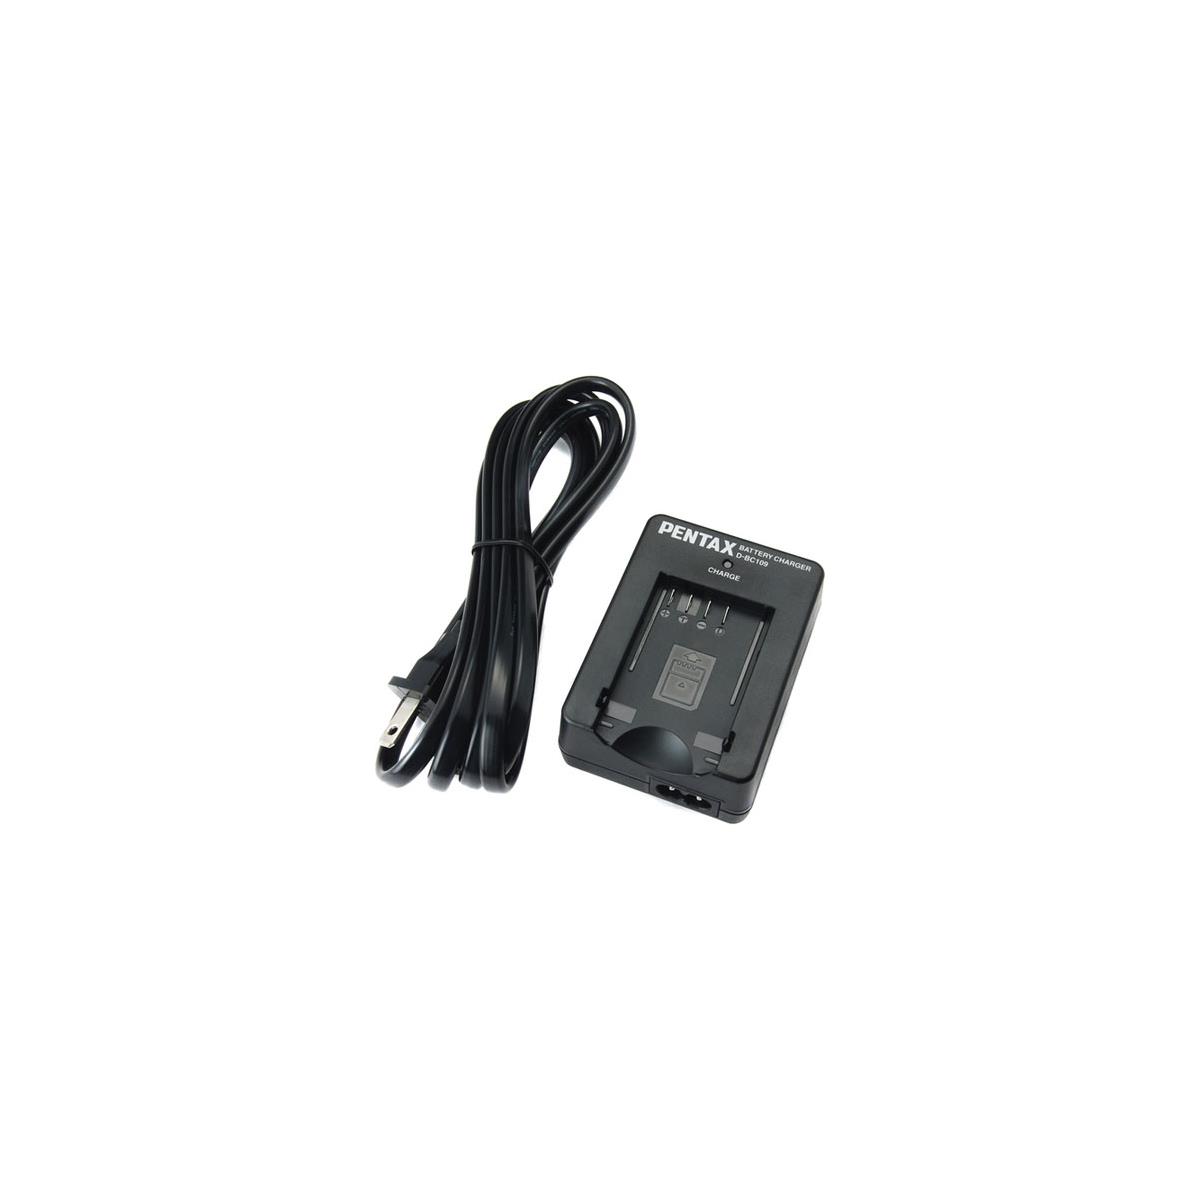 Photos - Camera Charger Pentax K-BC109 Charger Kit for D-LI109 Battery 39033 